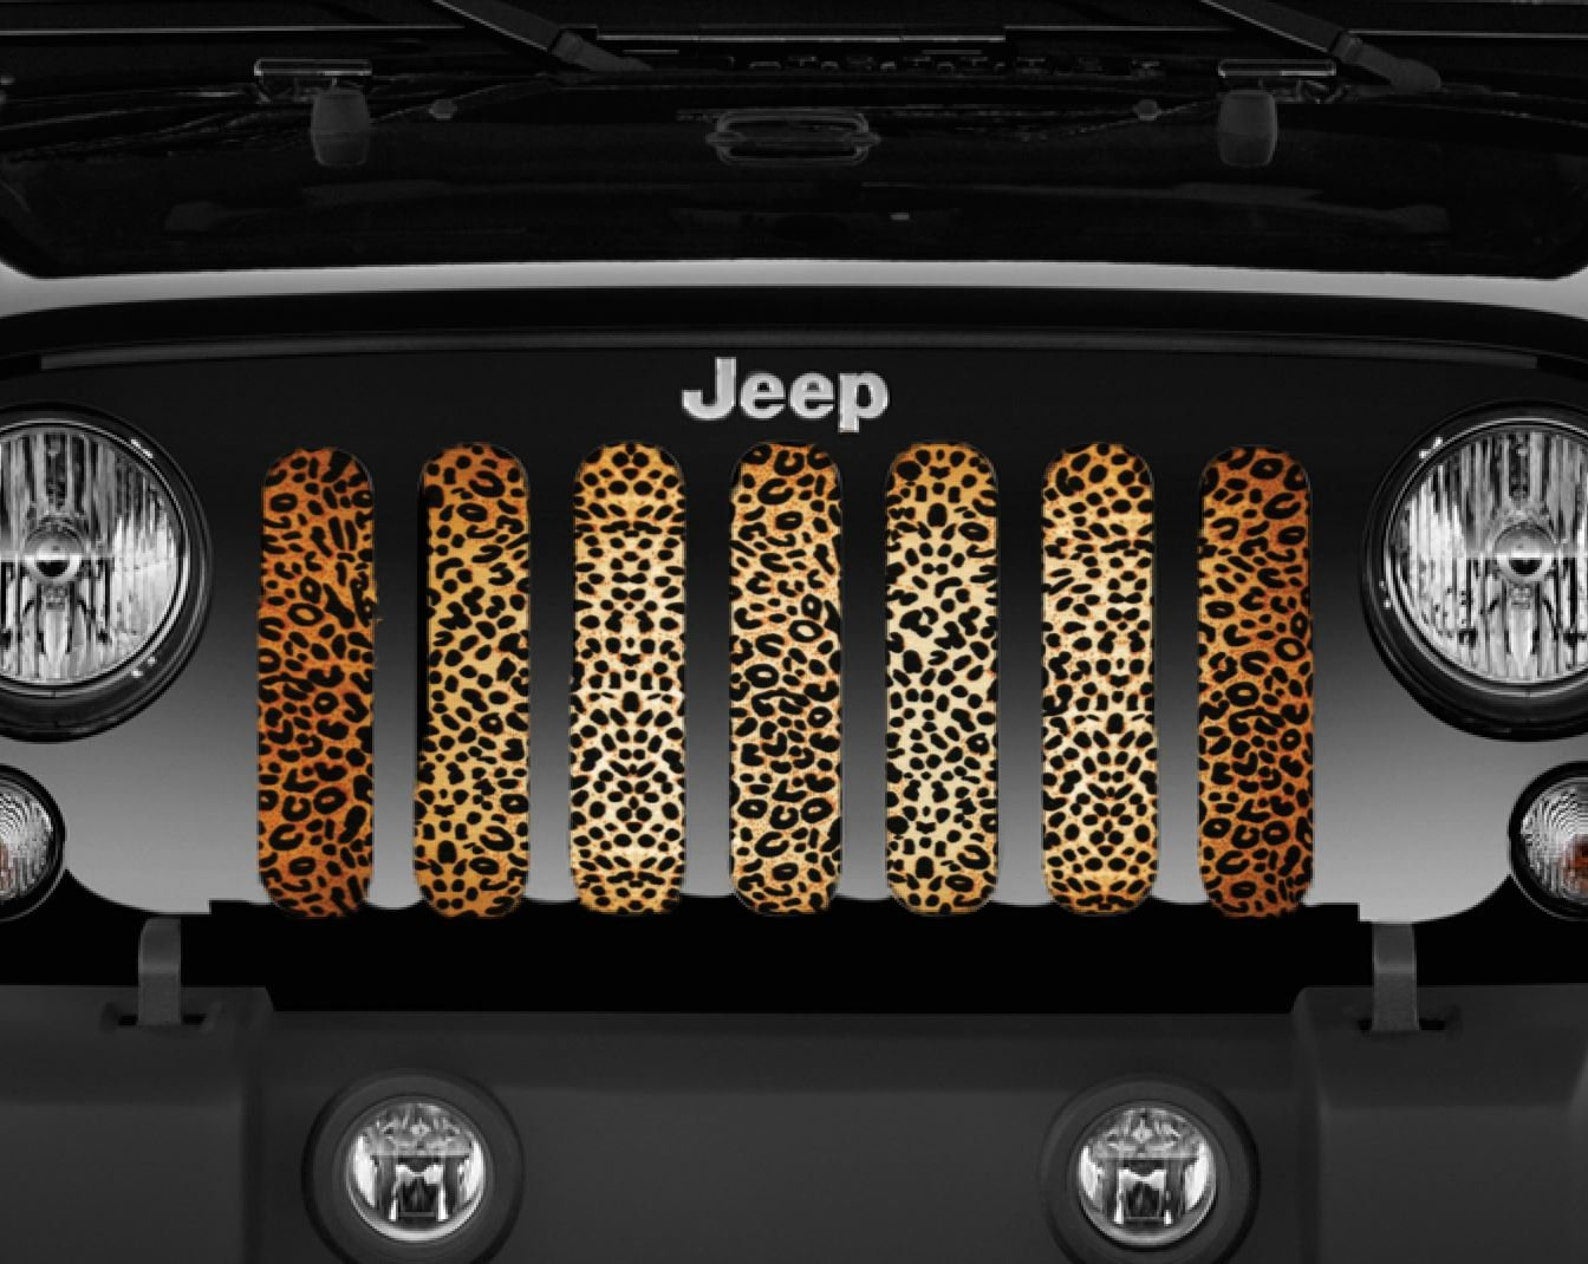 Cheetah print mesh grille insert for Jeep